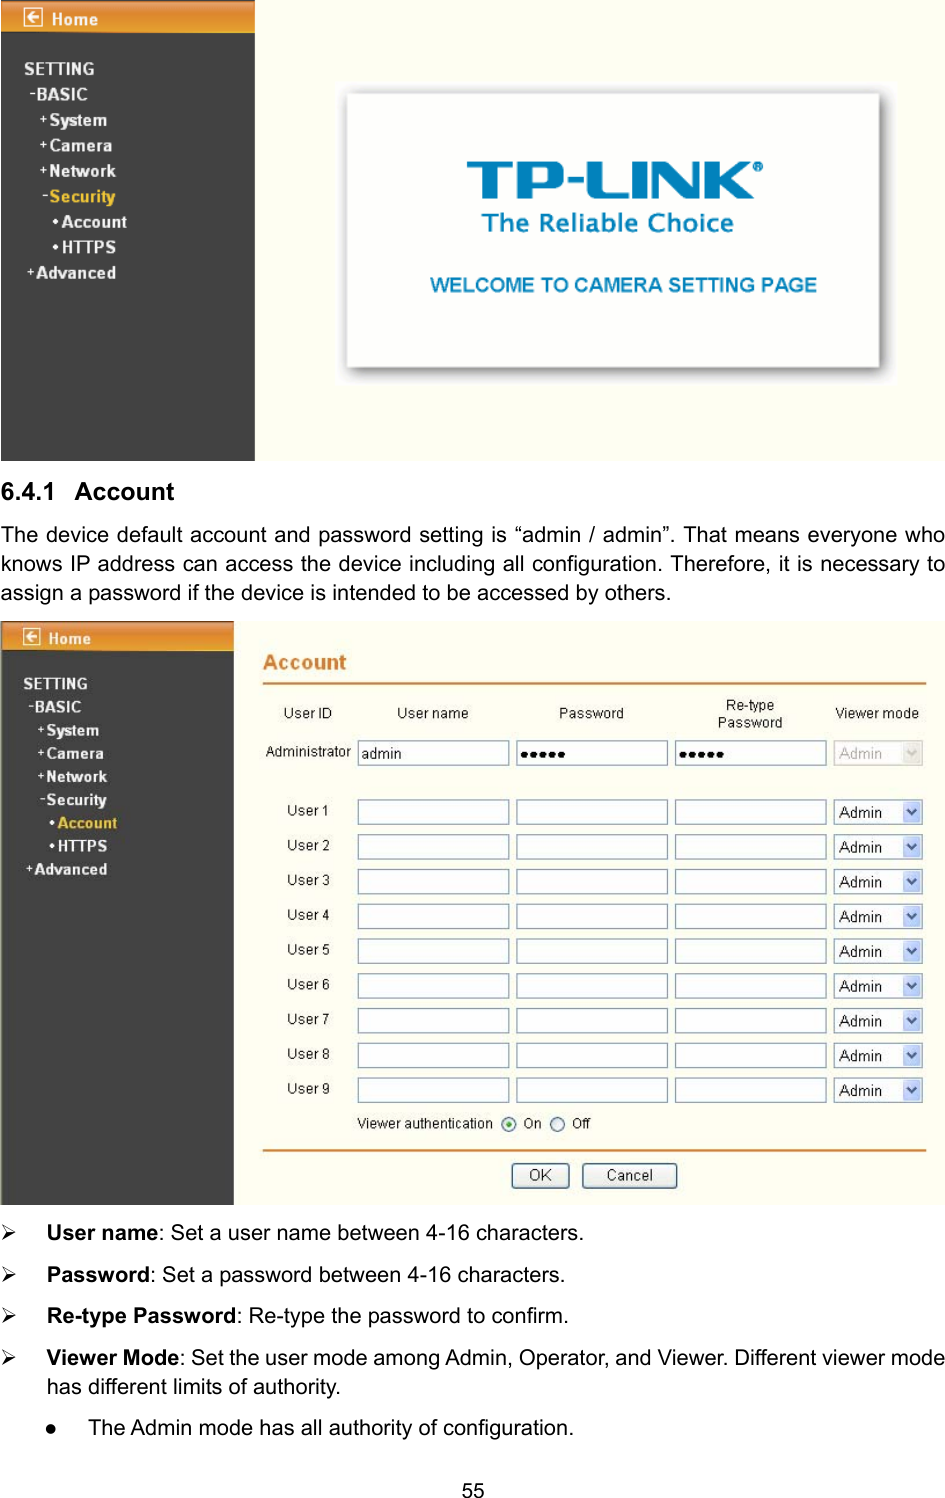 55  6.4.1  Account The device default account and password setting is “admin / admin”. That means everyone who knows IP address can access the device including all configuration. Therefore, it is necessary to assign a password if the device is intended to be accessed by others.    ¾ User name: Set a user name between 4-16 characters. ¾ Password: Set a password between 4-16 characters. ¾ Re-type Password: Re-type the password to confirm. ¾ Viewer Mode: Set the user mode among Admin, Operator, and Viewer. Different viewer mode has different limits of authority. z The Admin mode has all authority of configuration.   